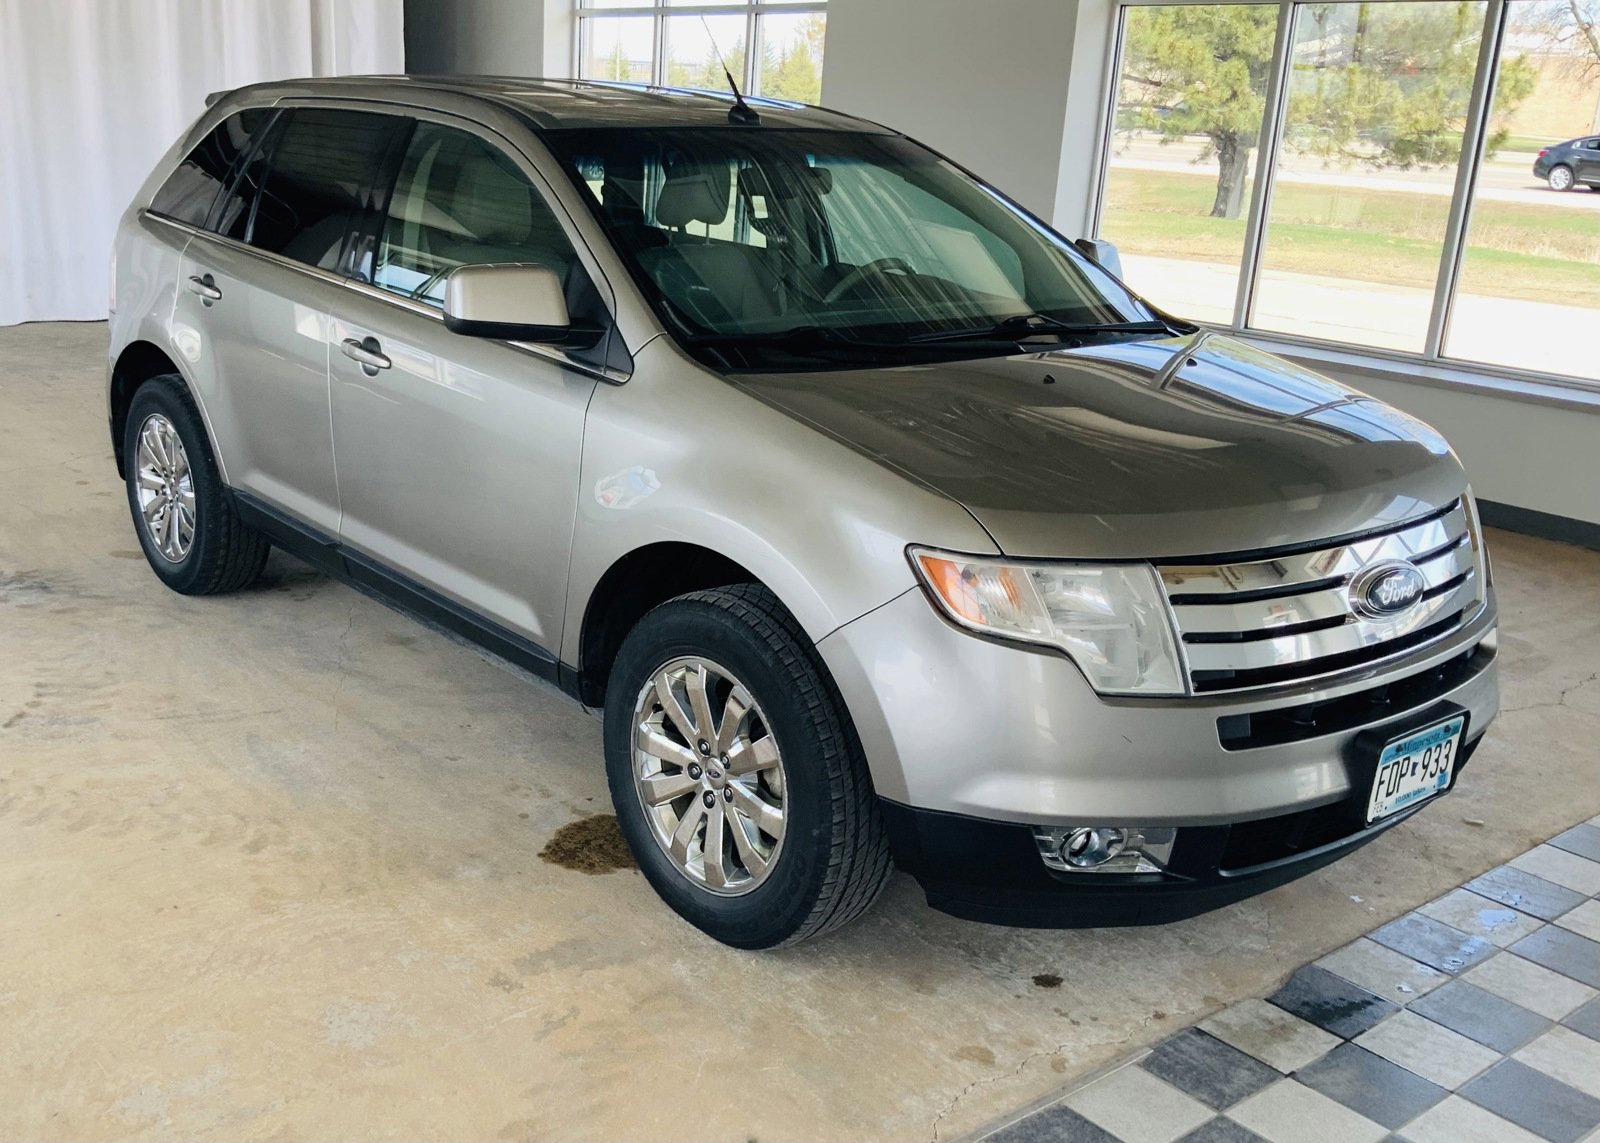 Used 2008 Ford Edge Limited with VIN 2FMDK39C68BA83238 for sale in Alexandria, Minnesota